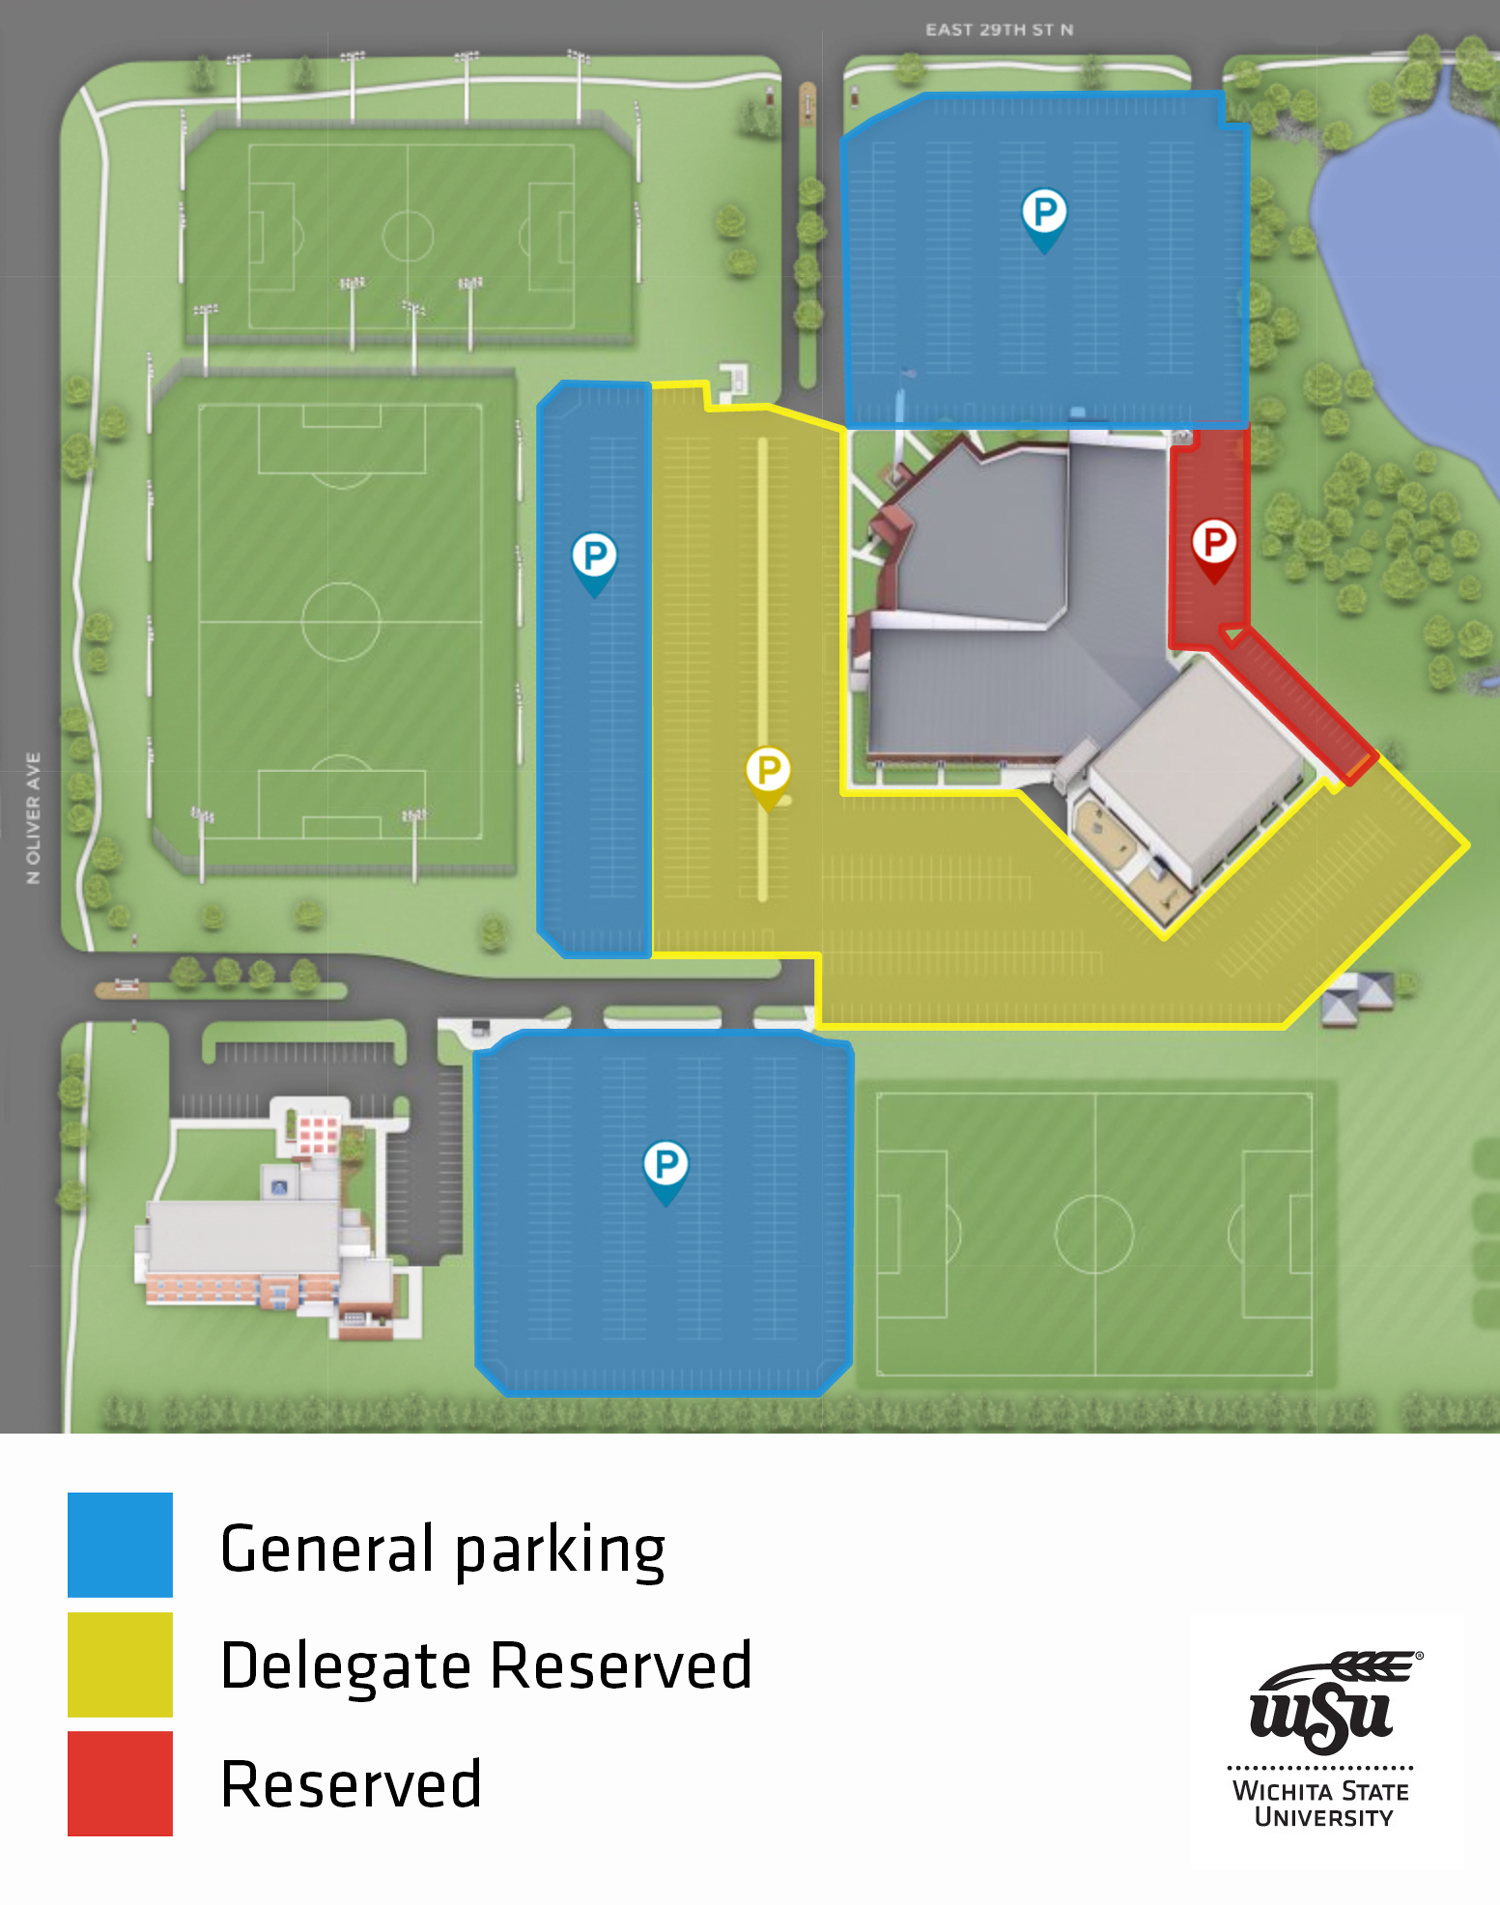 Inauguration Parking map showing general, delegate reserved, and reserved parking areas at the Hughes Metropolitan Complex.